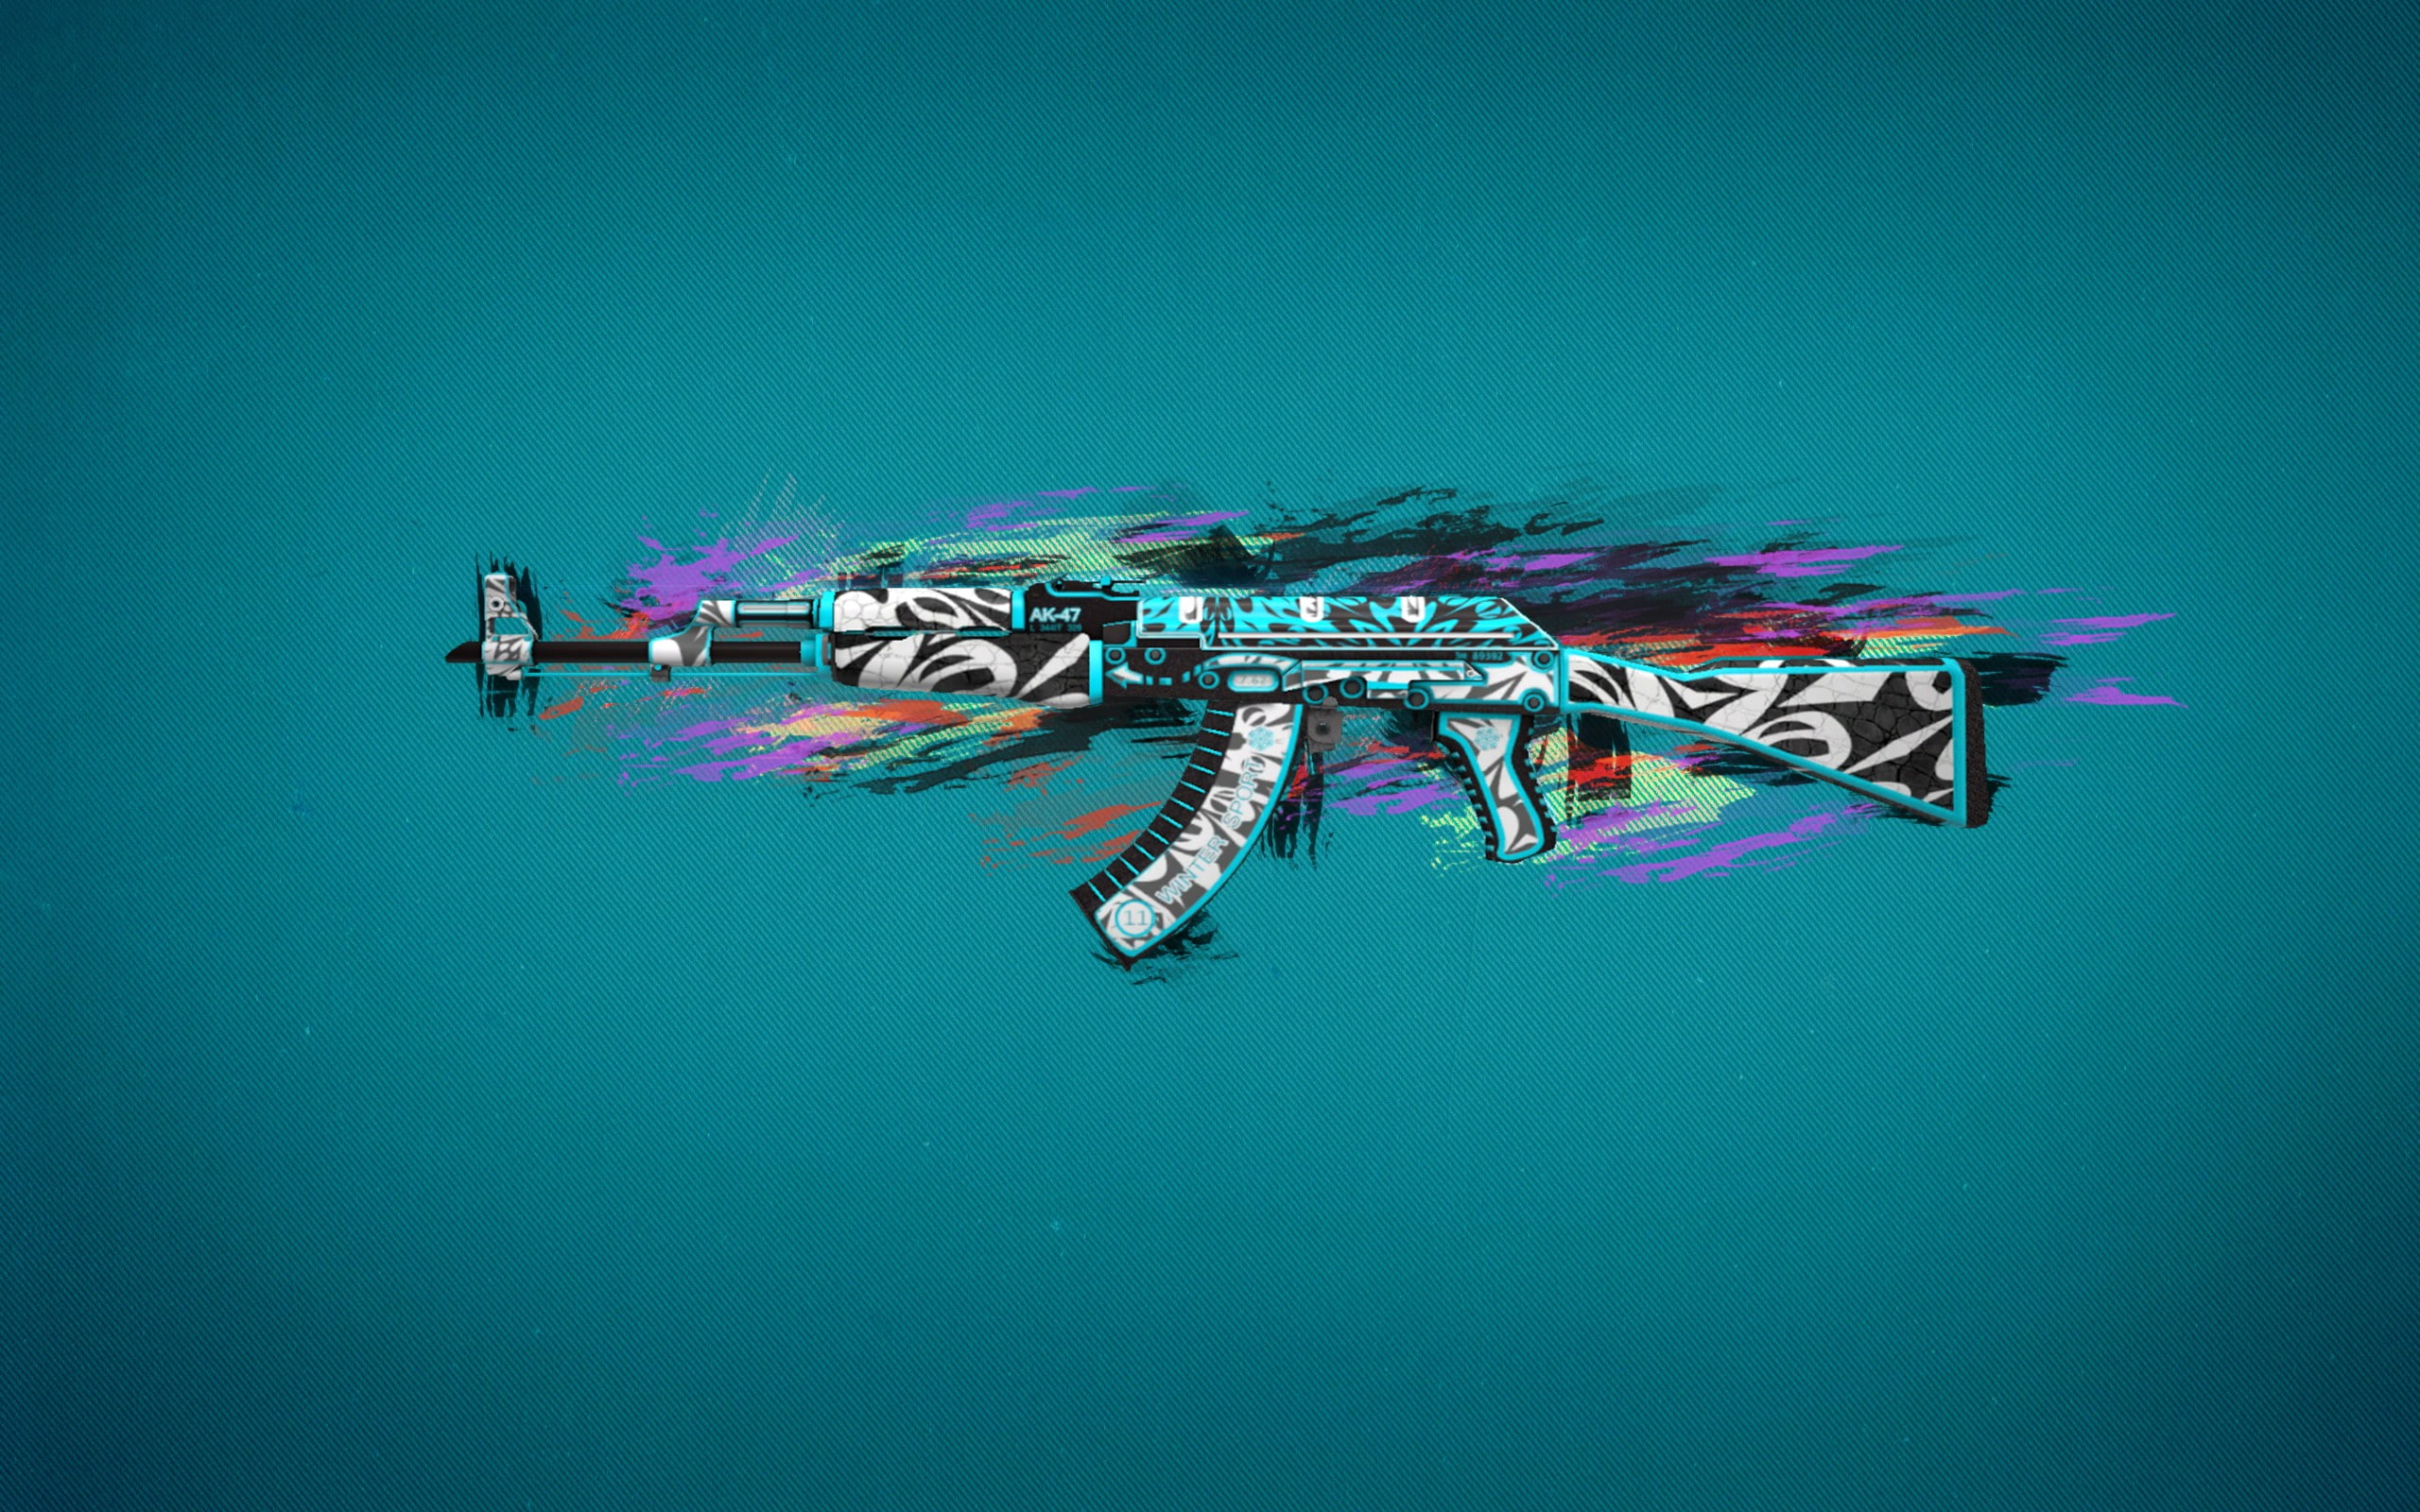 Counter-Strike: Global Offensive, Frontside  Misty, AKM, colorful